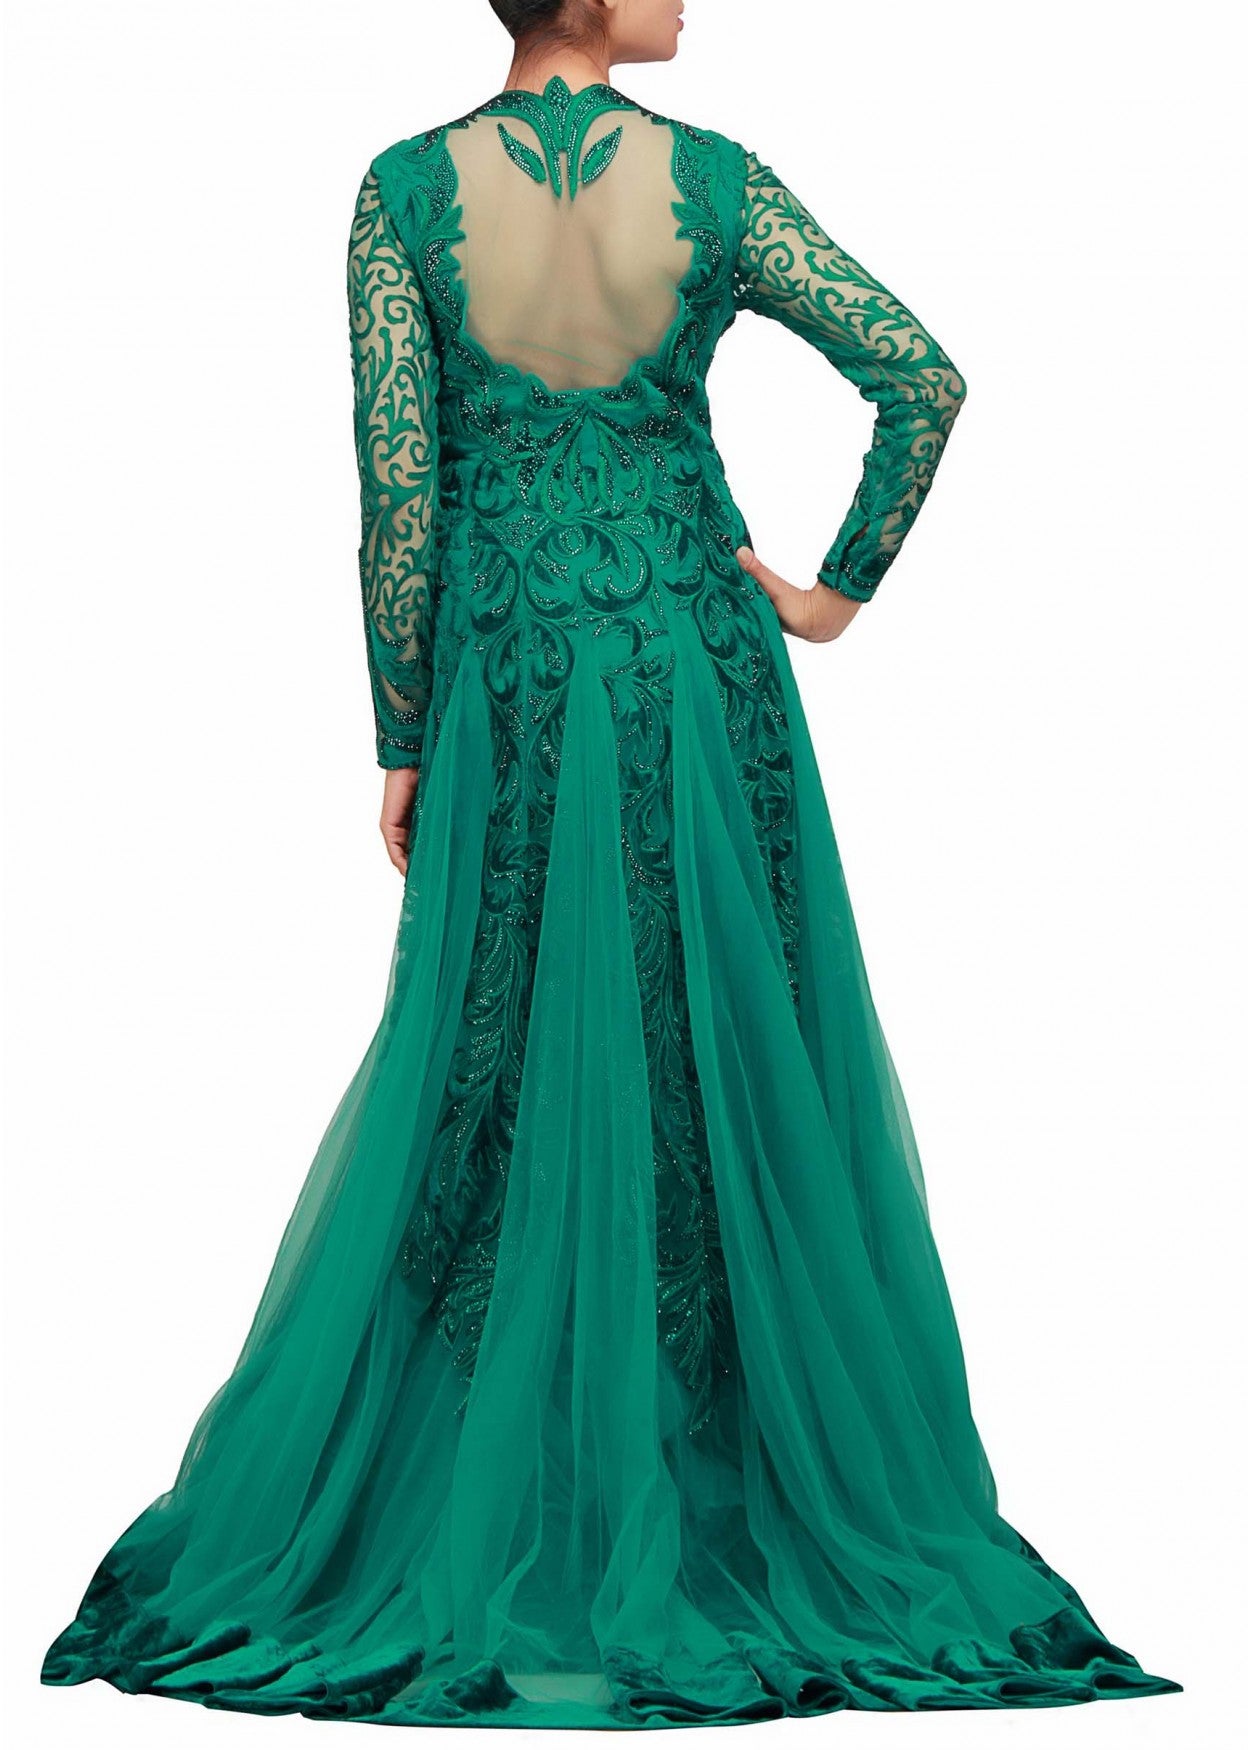 Teal Green Gown with applique work